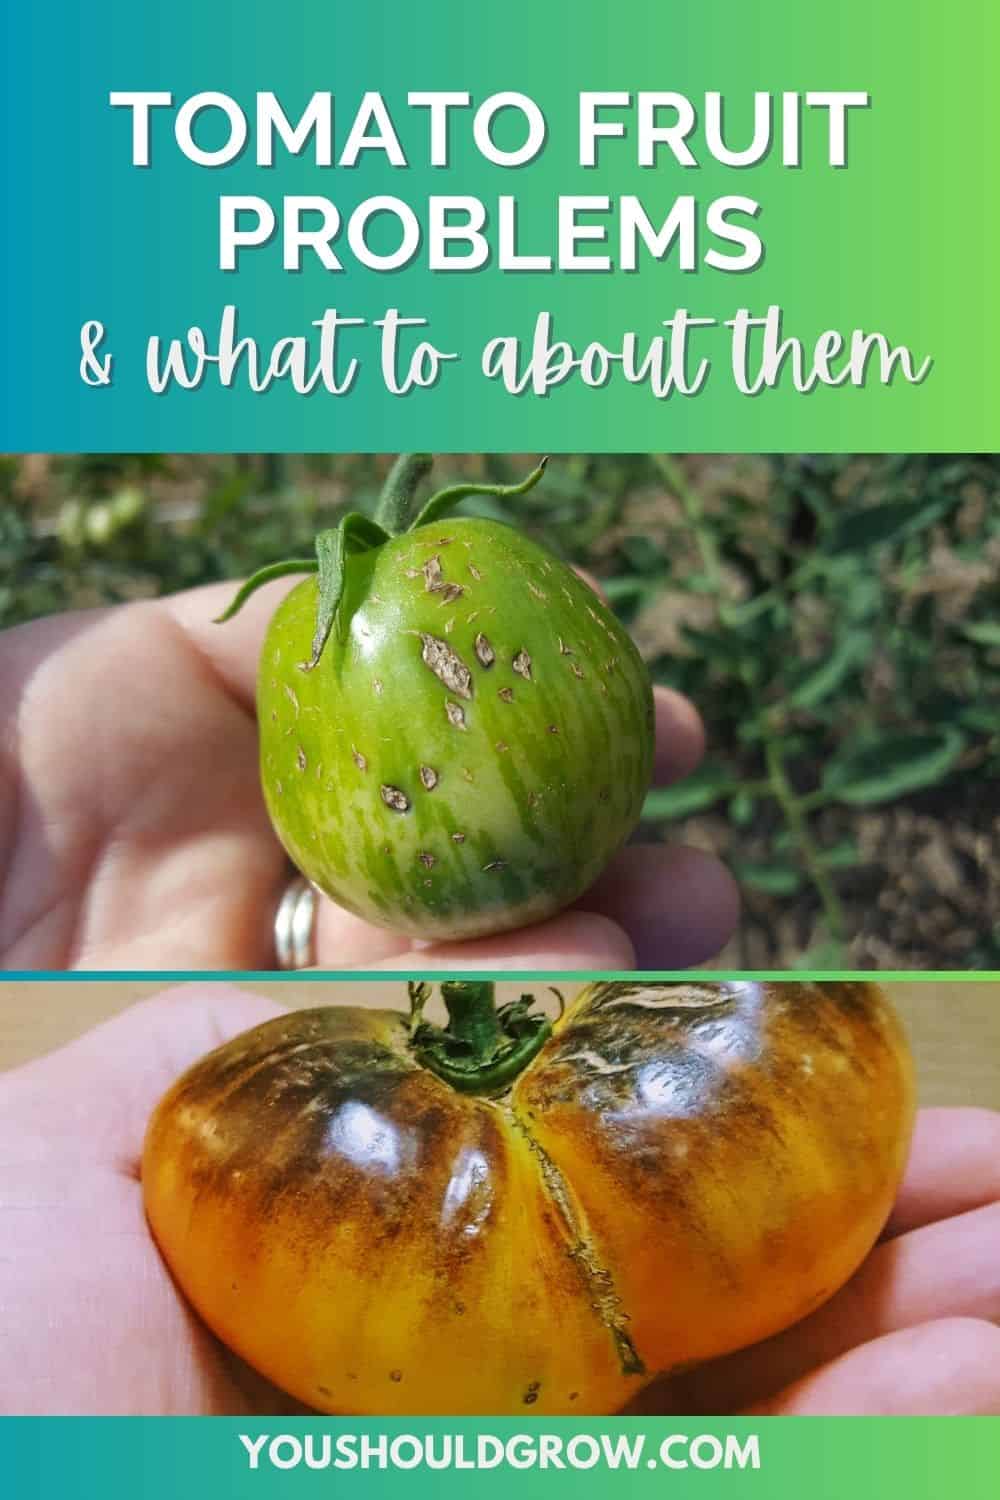 Tomato Problems: What’s Wrong With My Tomato?